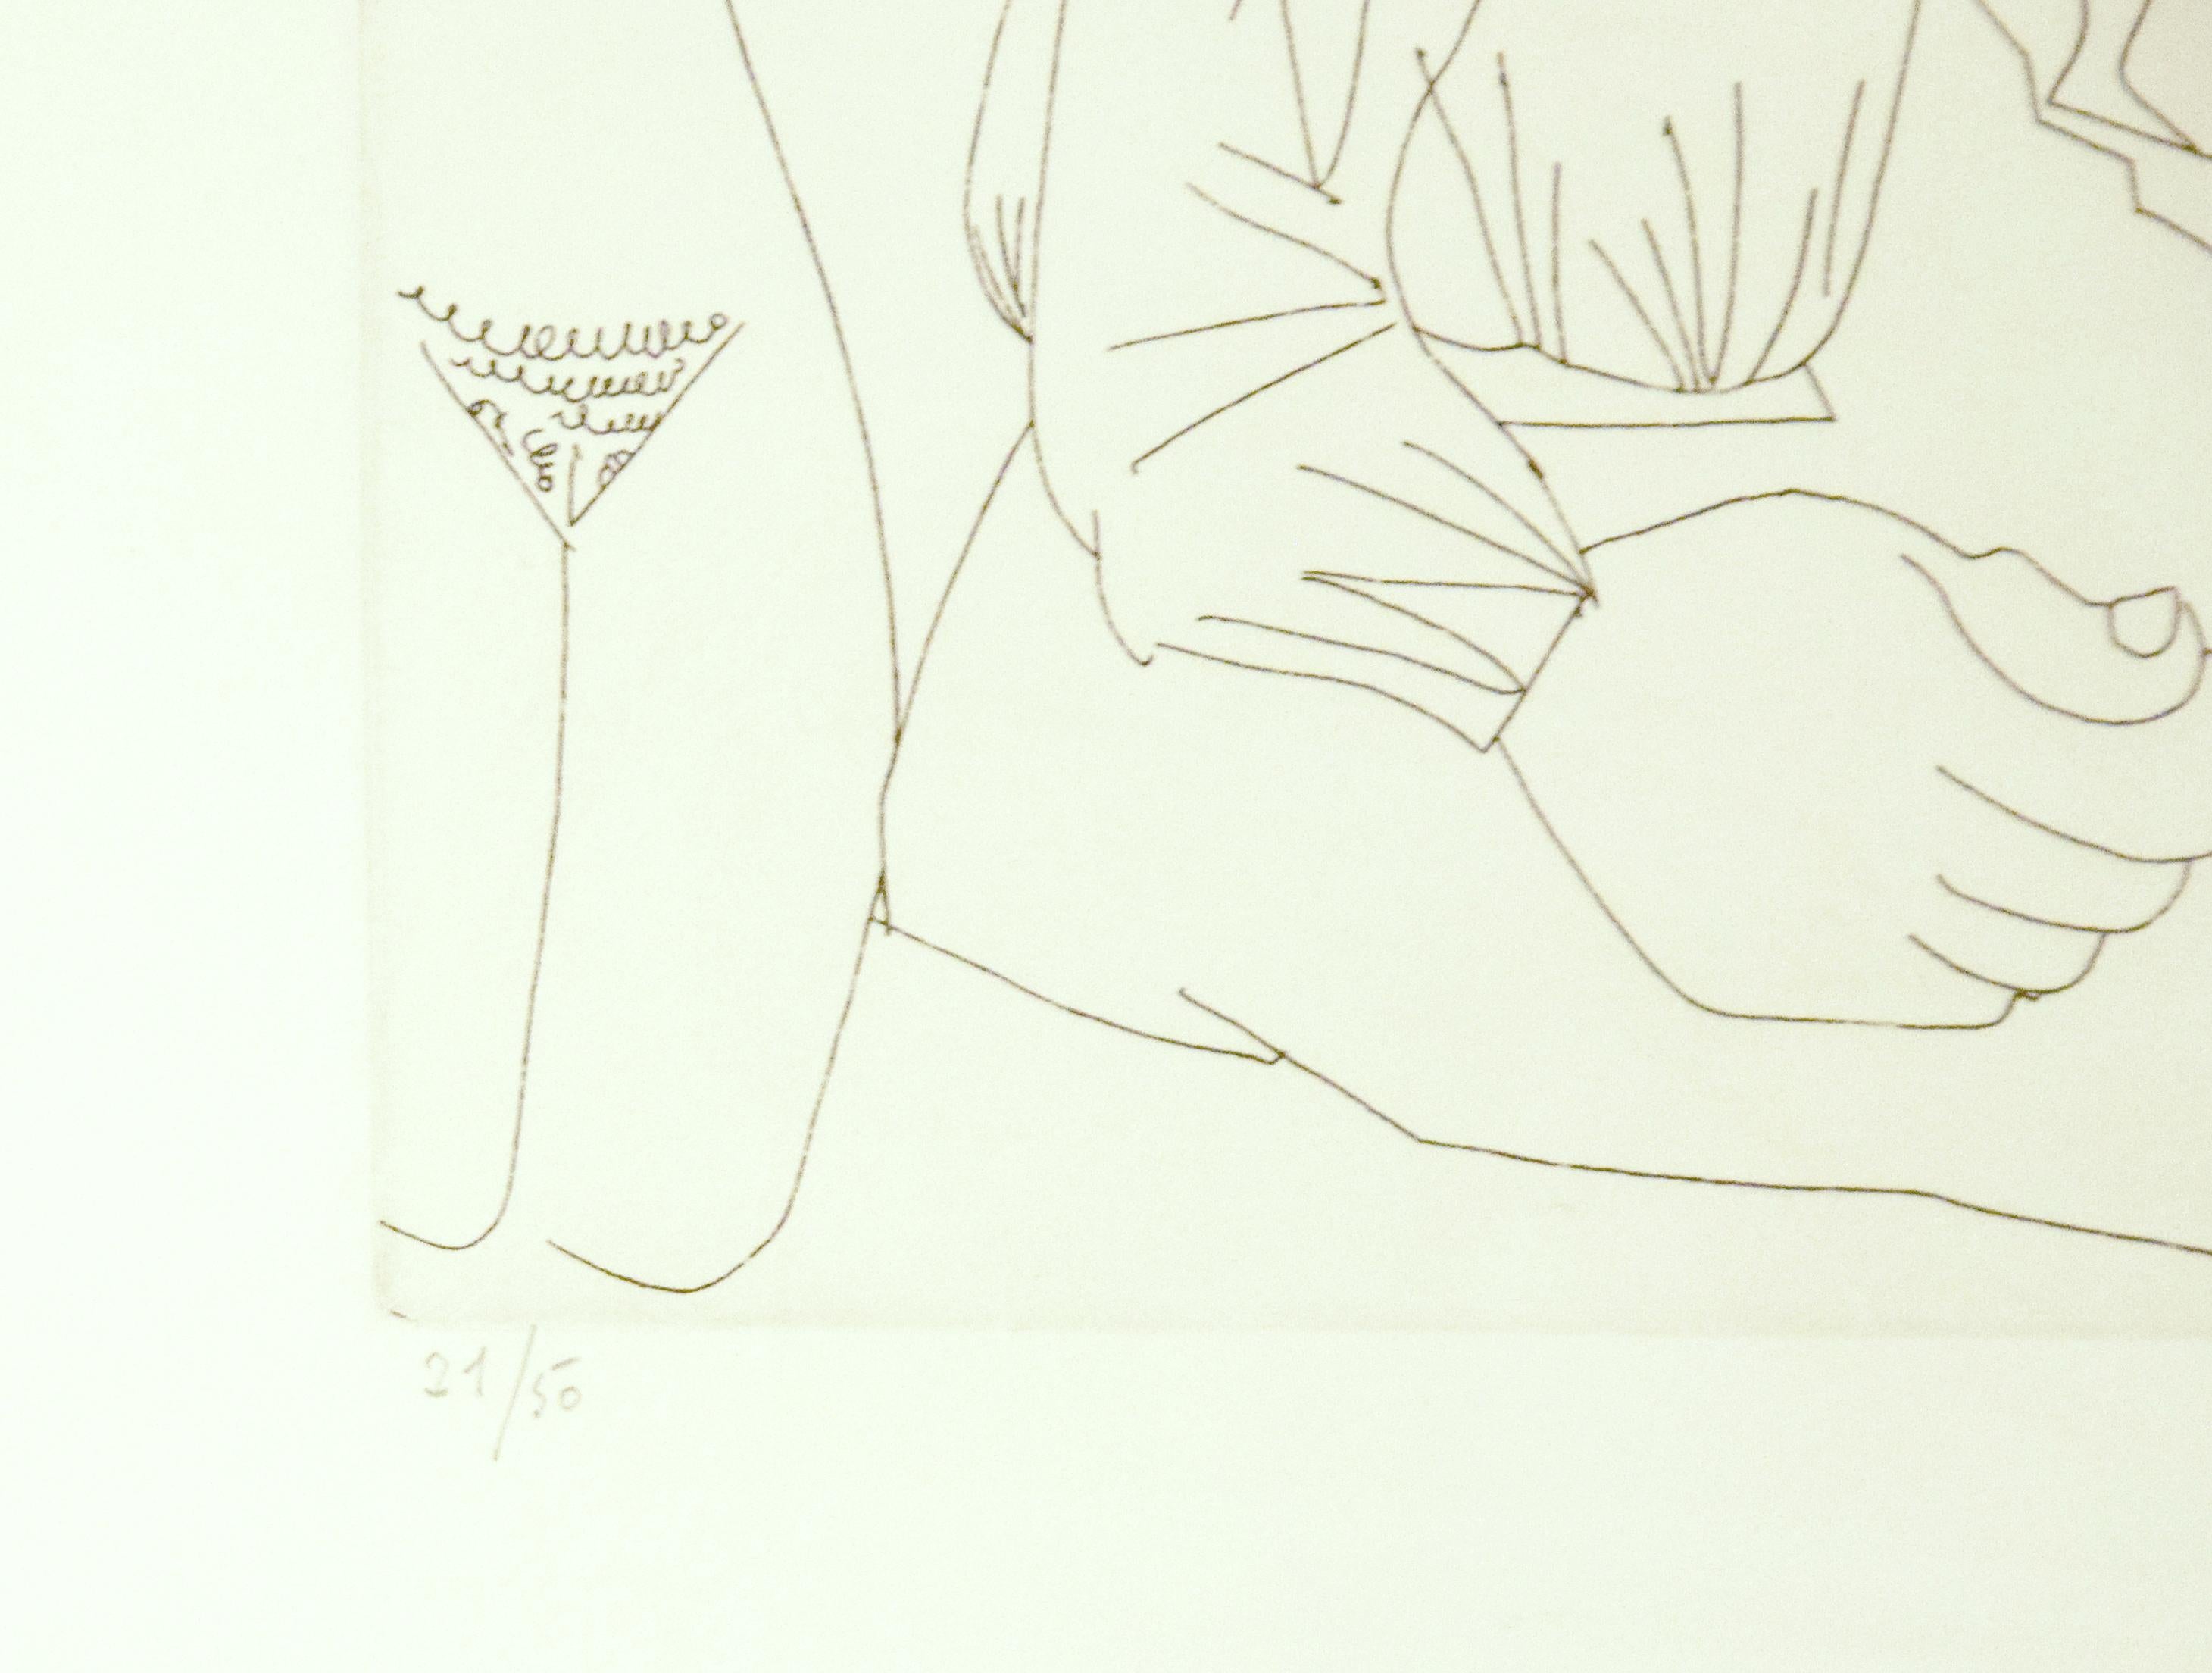 Untitled, 29.4.68.II - Original b/w Etching by Pablo Picasso - 1968 2